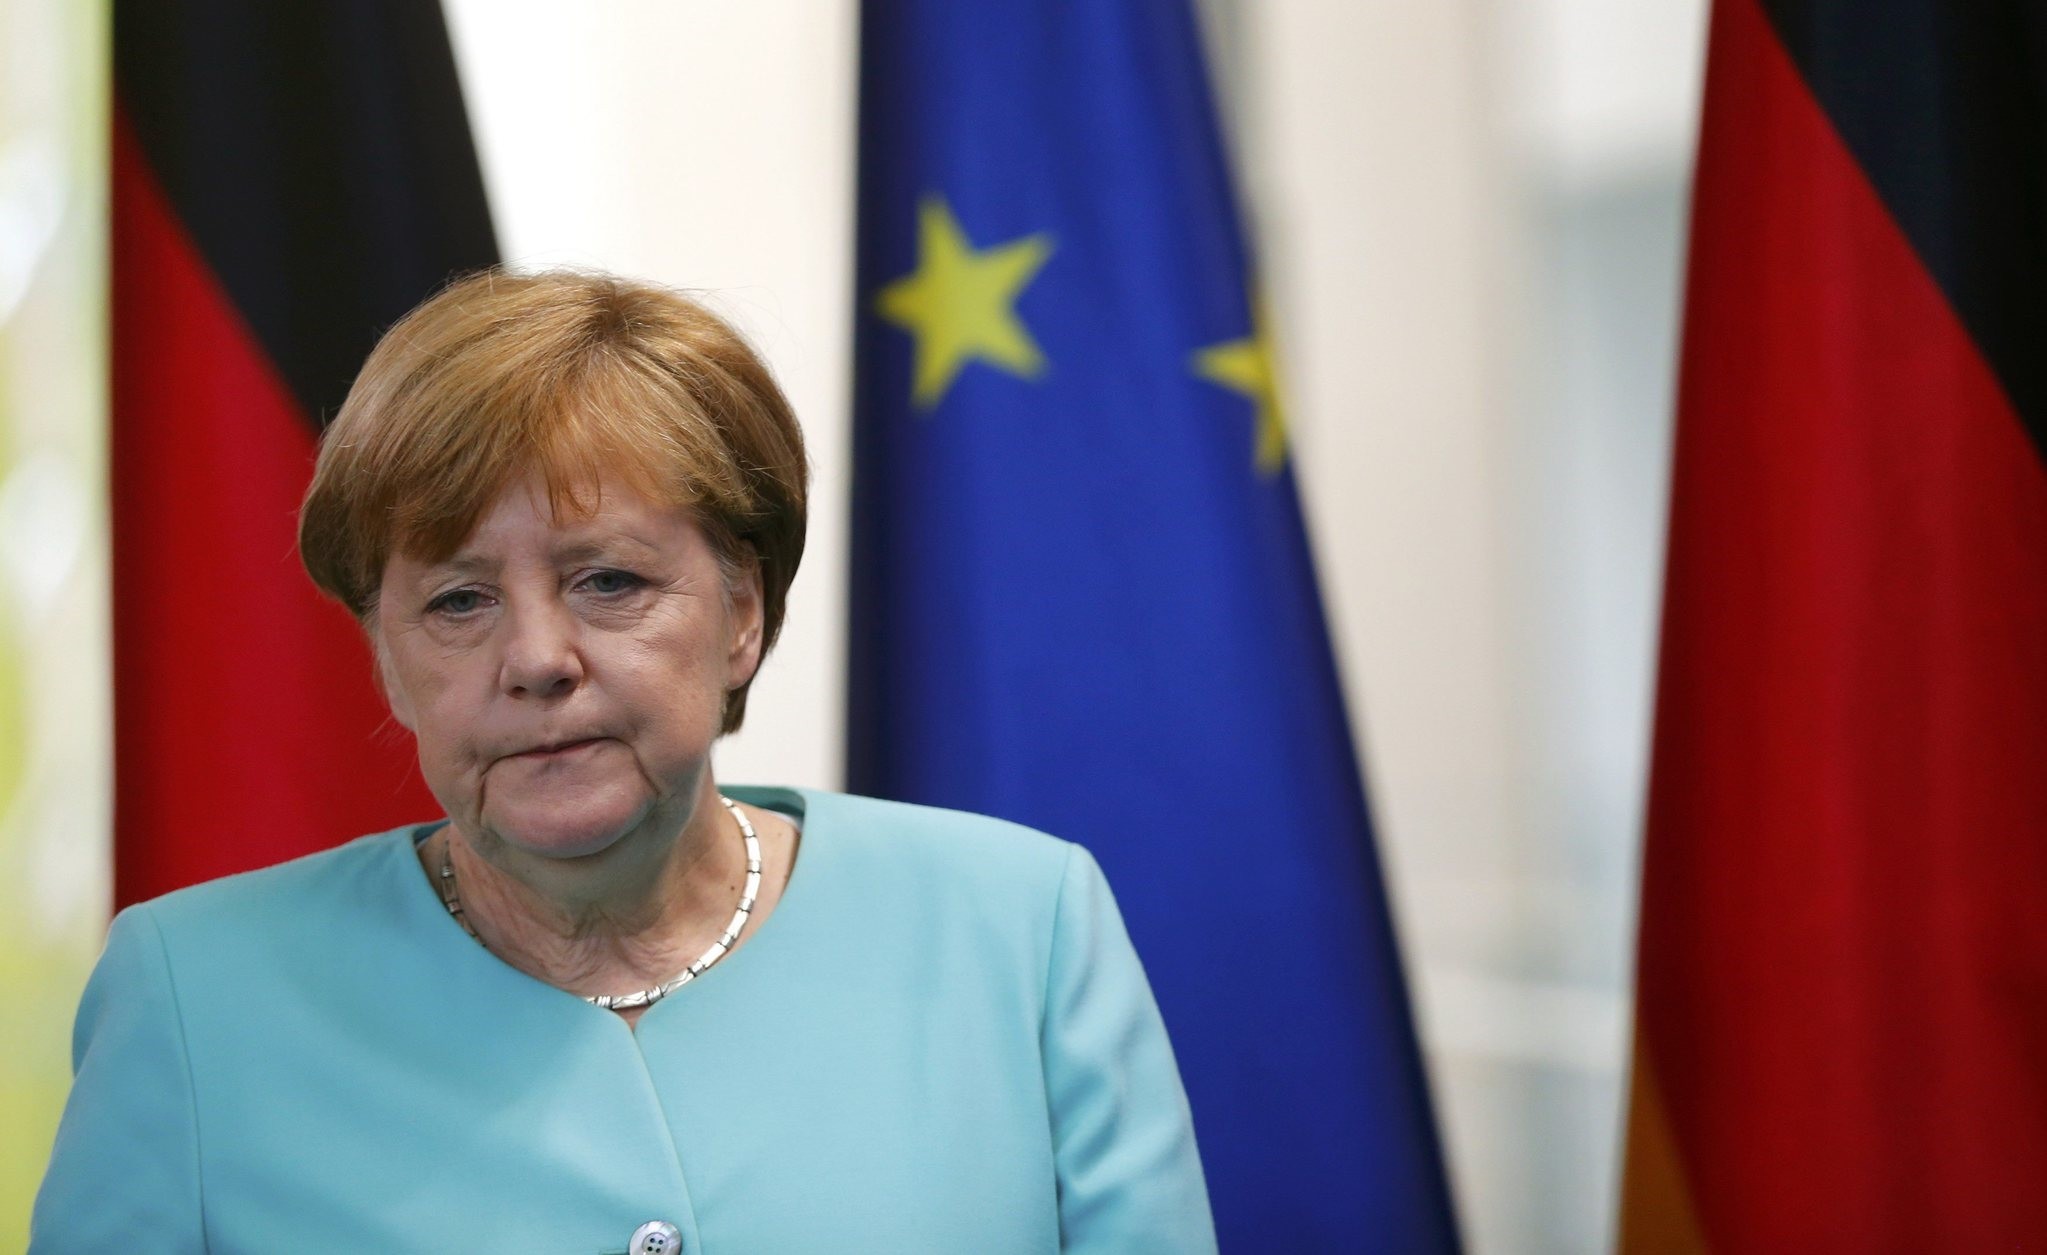 German Chancellor Angela Merkel arrives for a statement in Berlin, Germany, June 24, 2016, after Britain voted to leave the European Union in the EU BREXIT referendum. (REUTERS Photo)